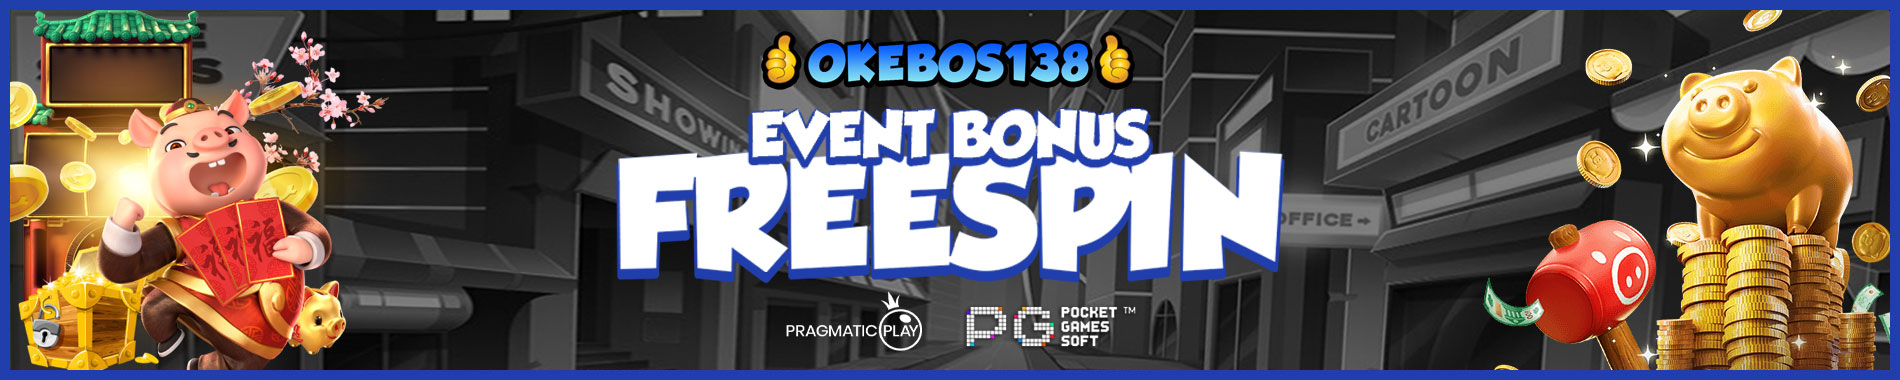 EVENT FREESPIN